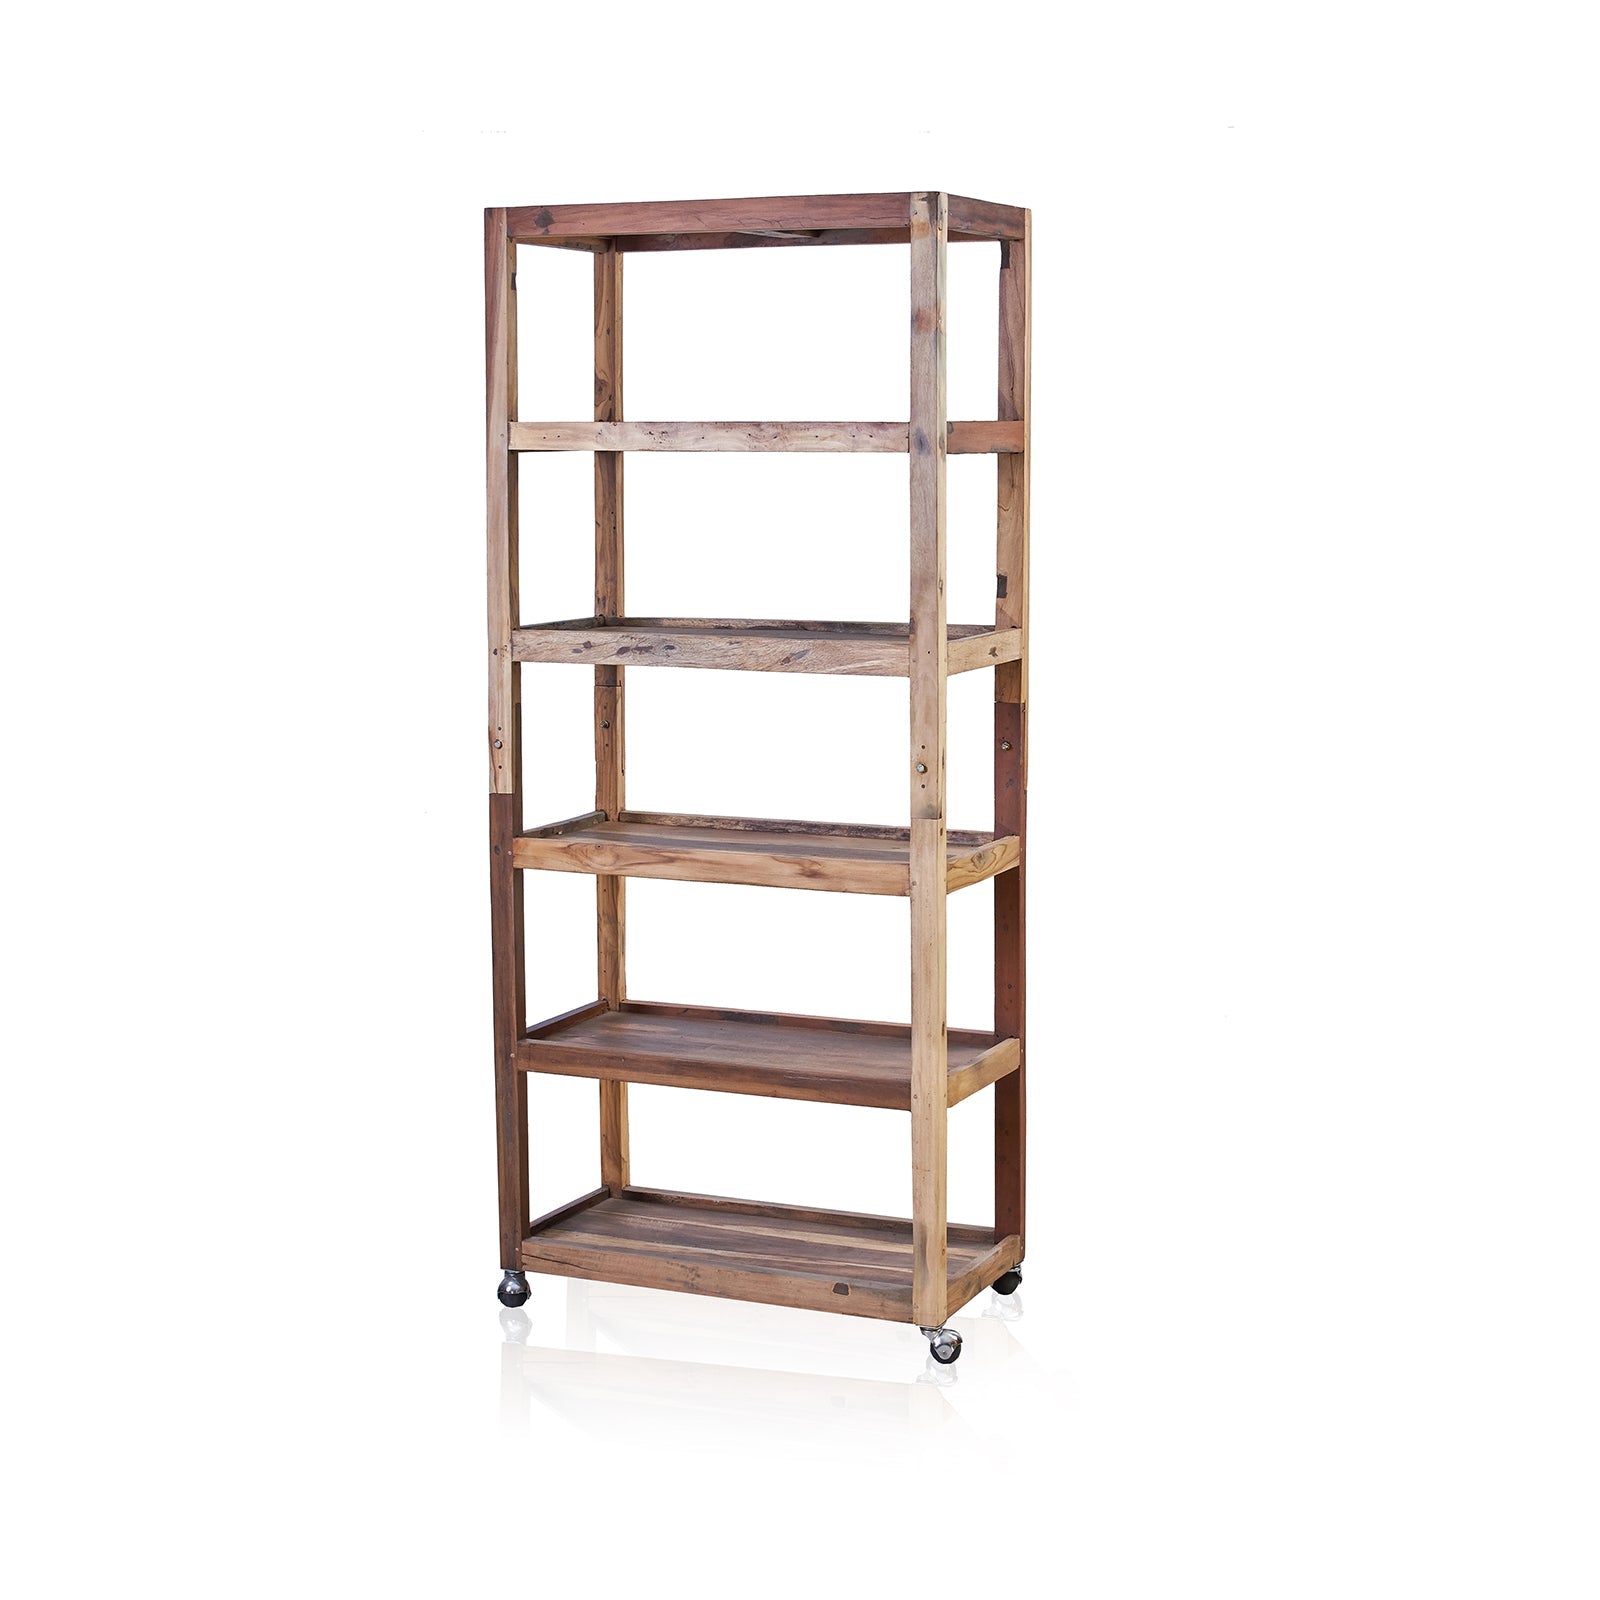 View Six Shelf Display with Casters Recycled Wood information